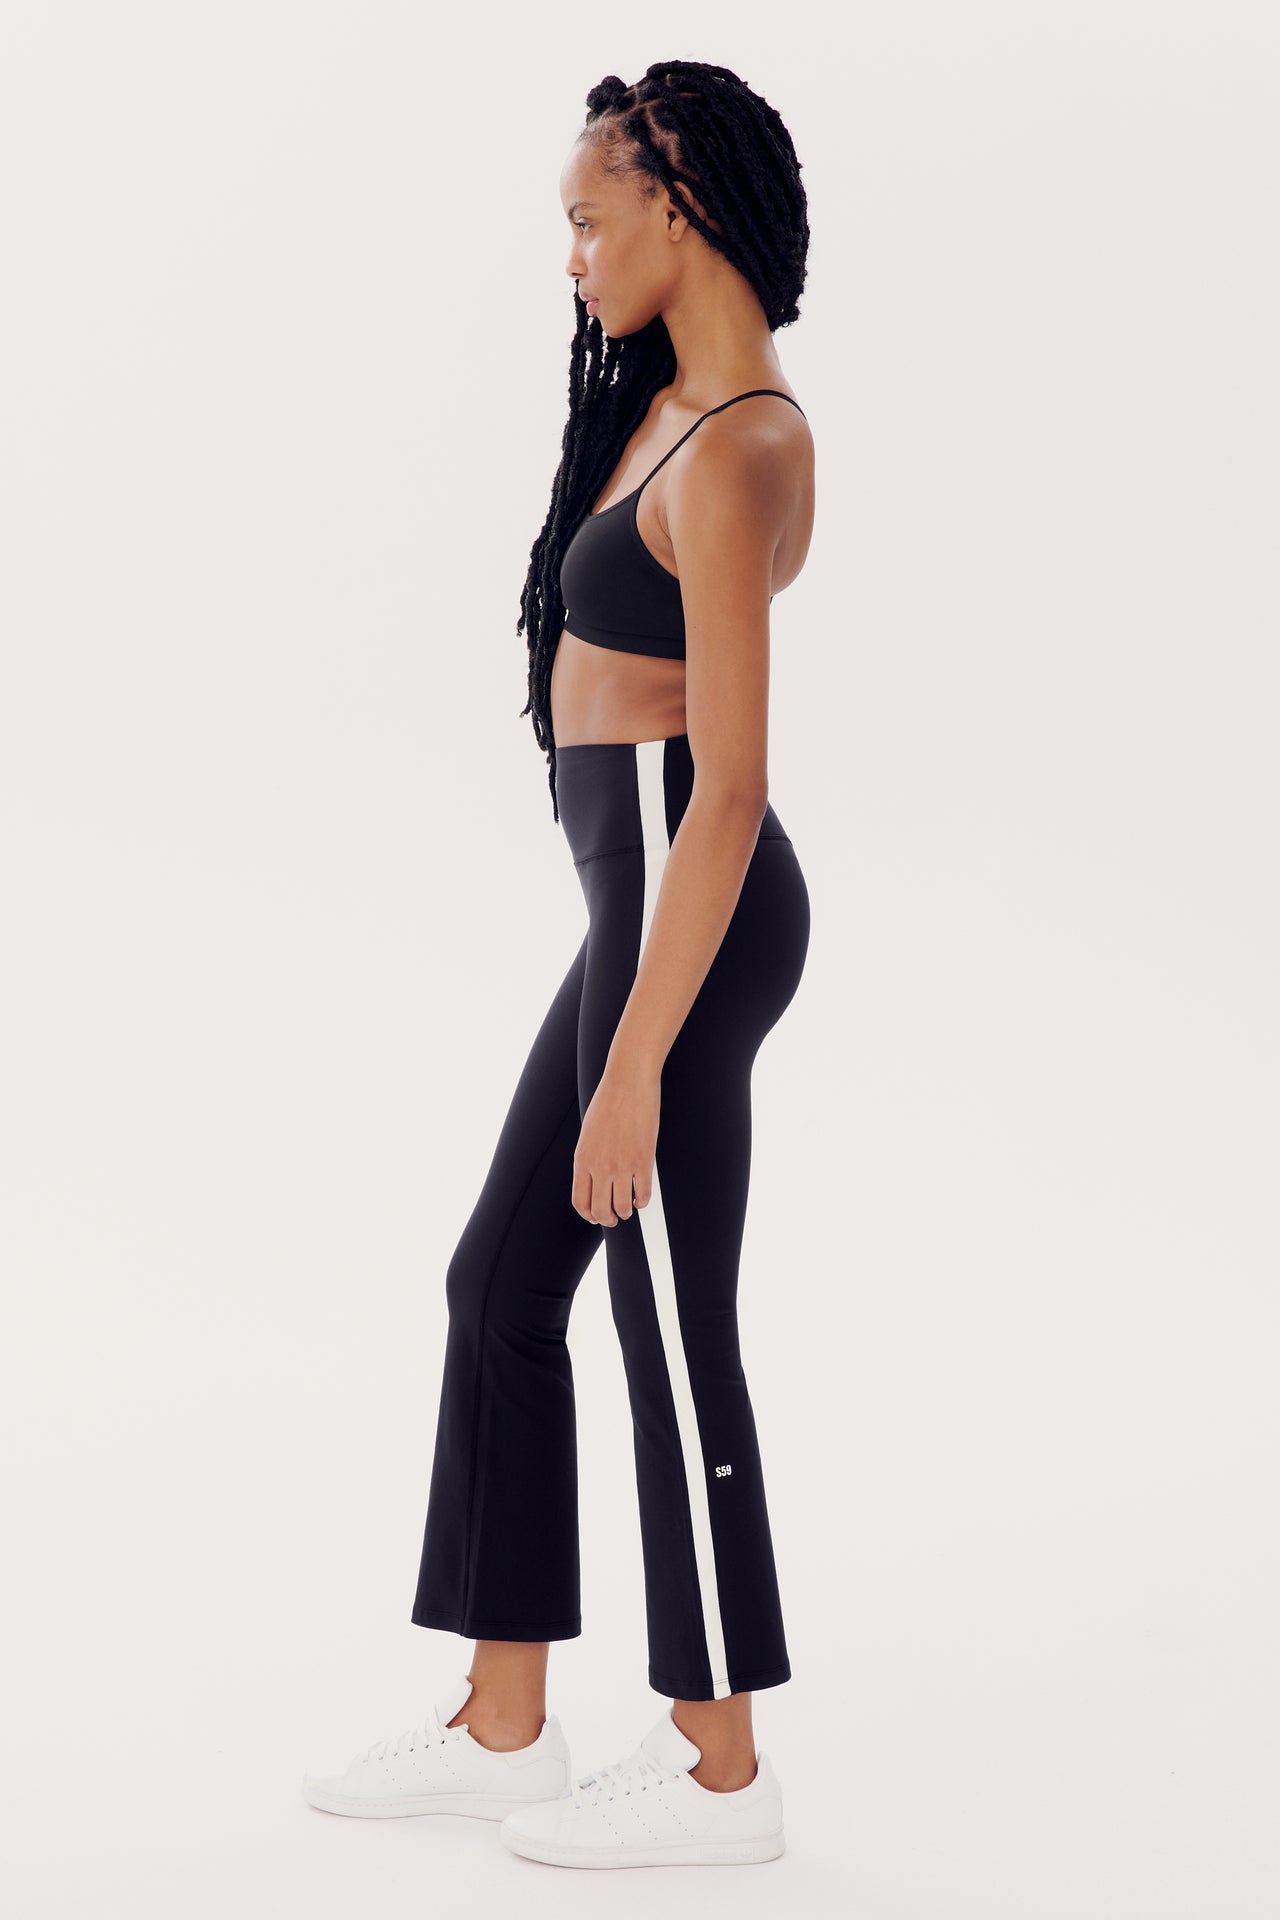 A person wearing a black Raquel High Waist Crop - Black/White by SPLITS59 with a white stripe down the sides, made of stretchy spandex fabric, and white sneakers stands in profile against a plain white background.